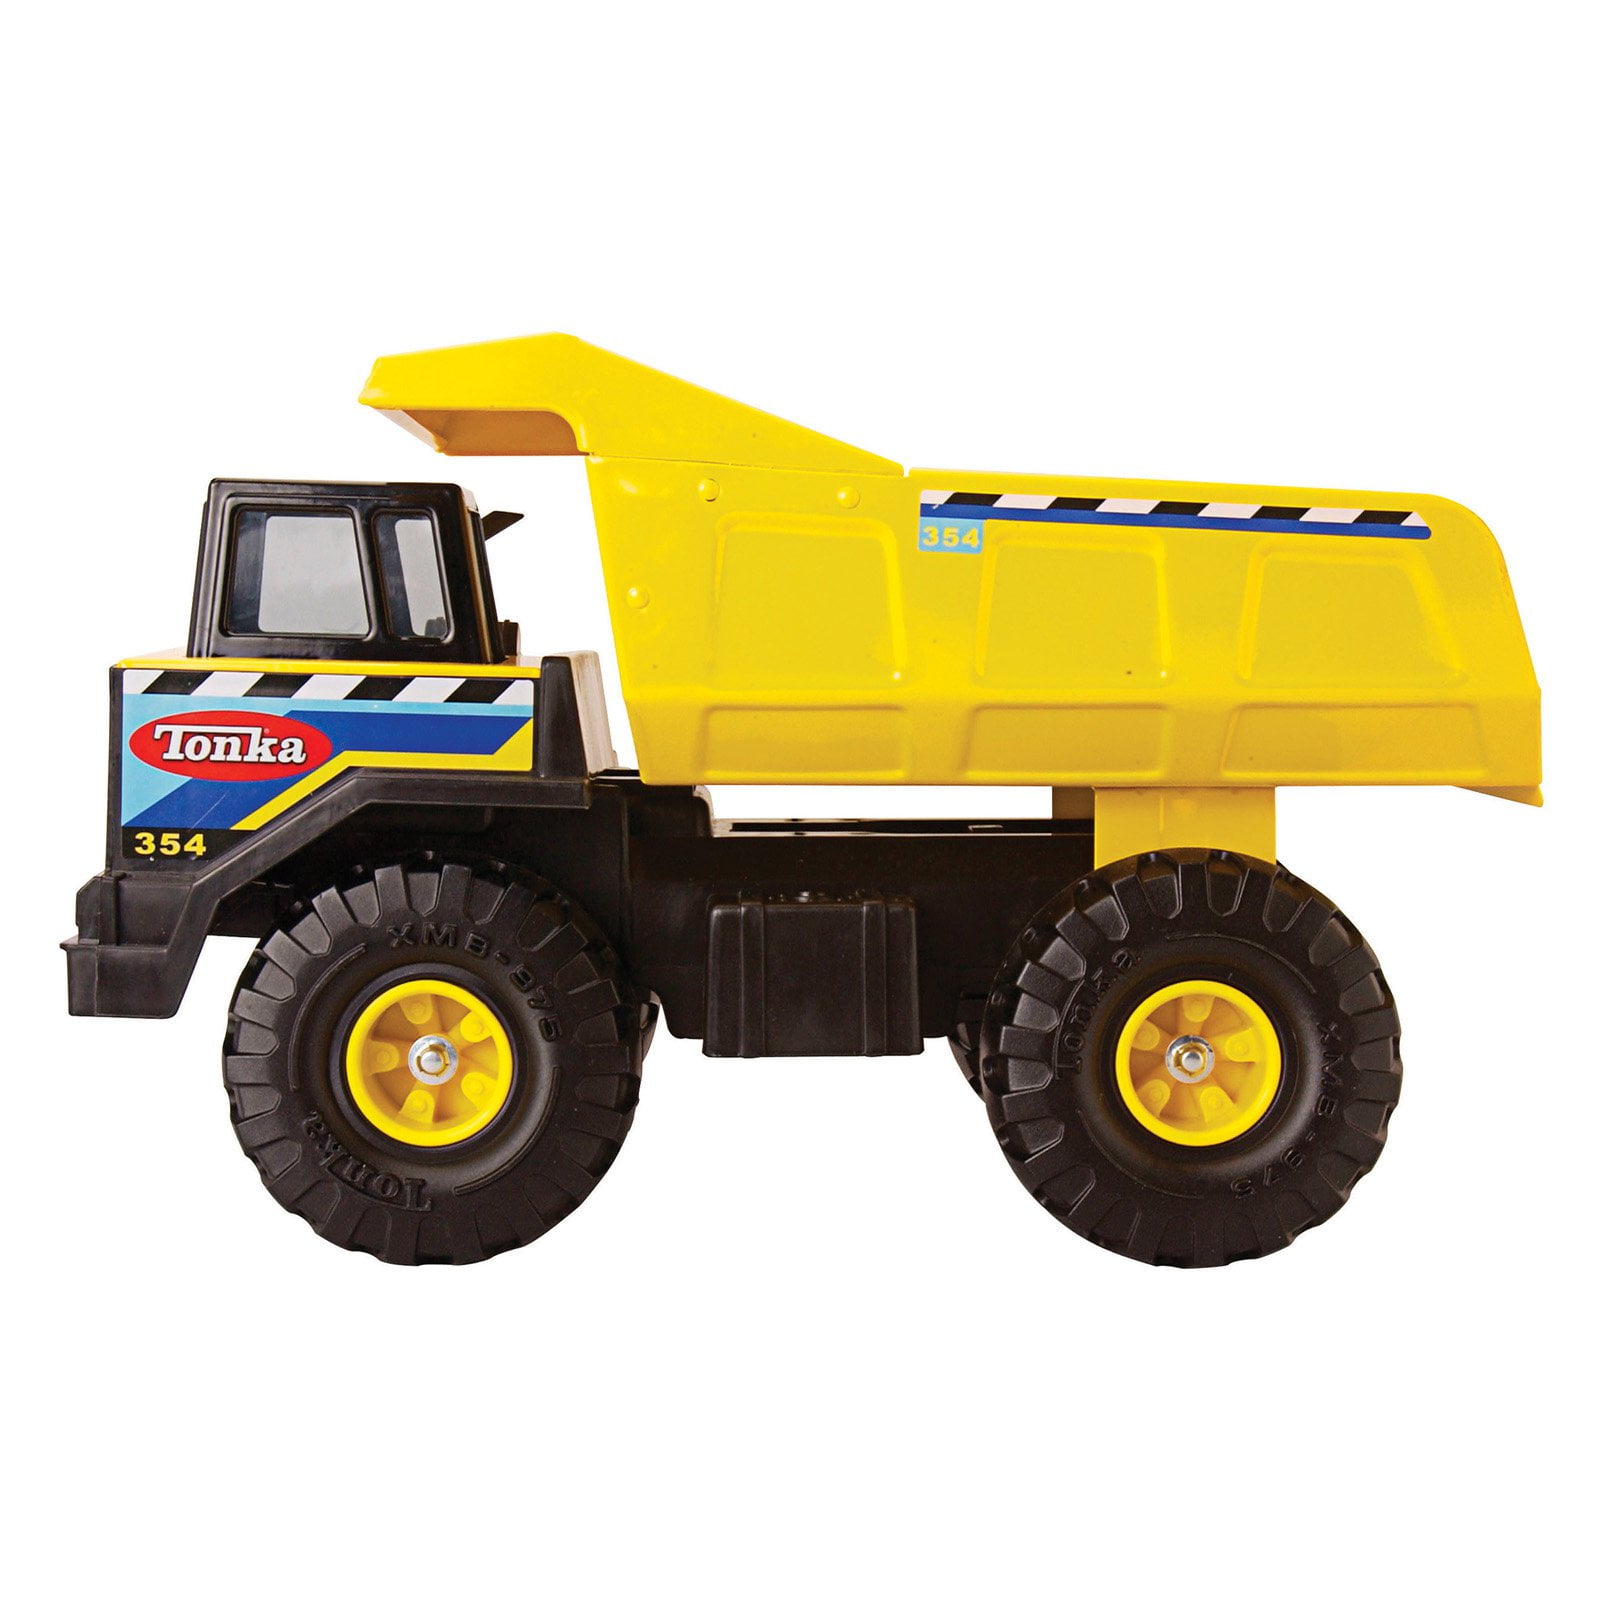 Details about   Tonka Steel Classics Mighty Dump Truck 06025 